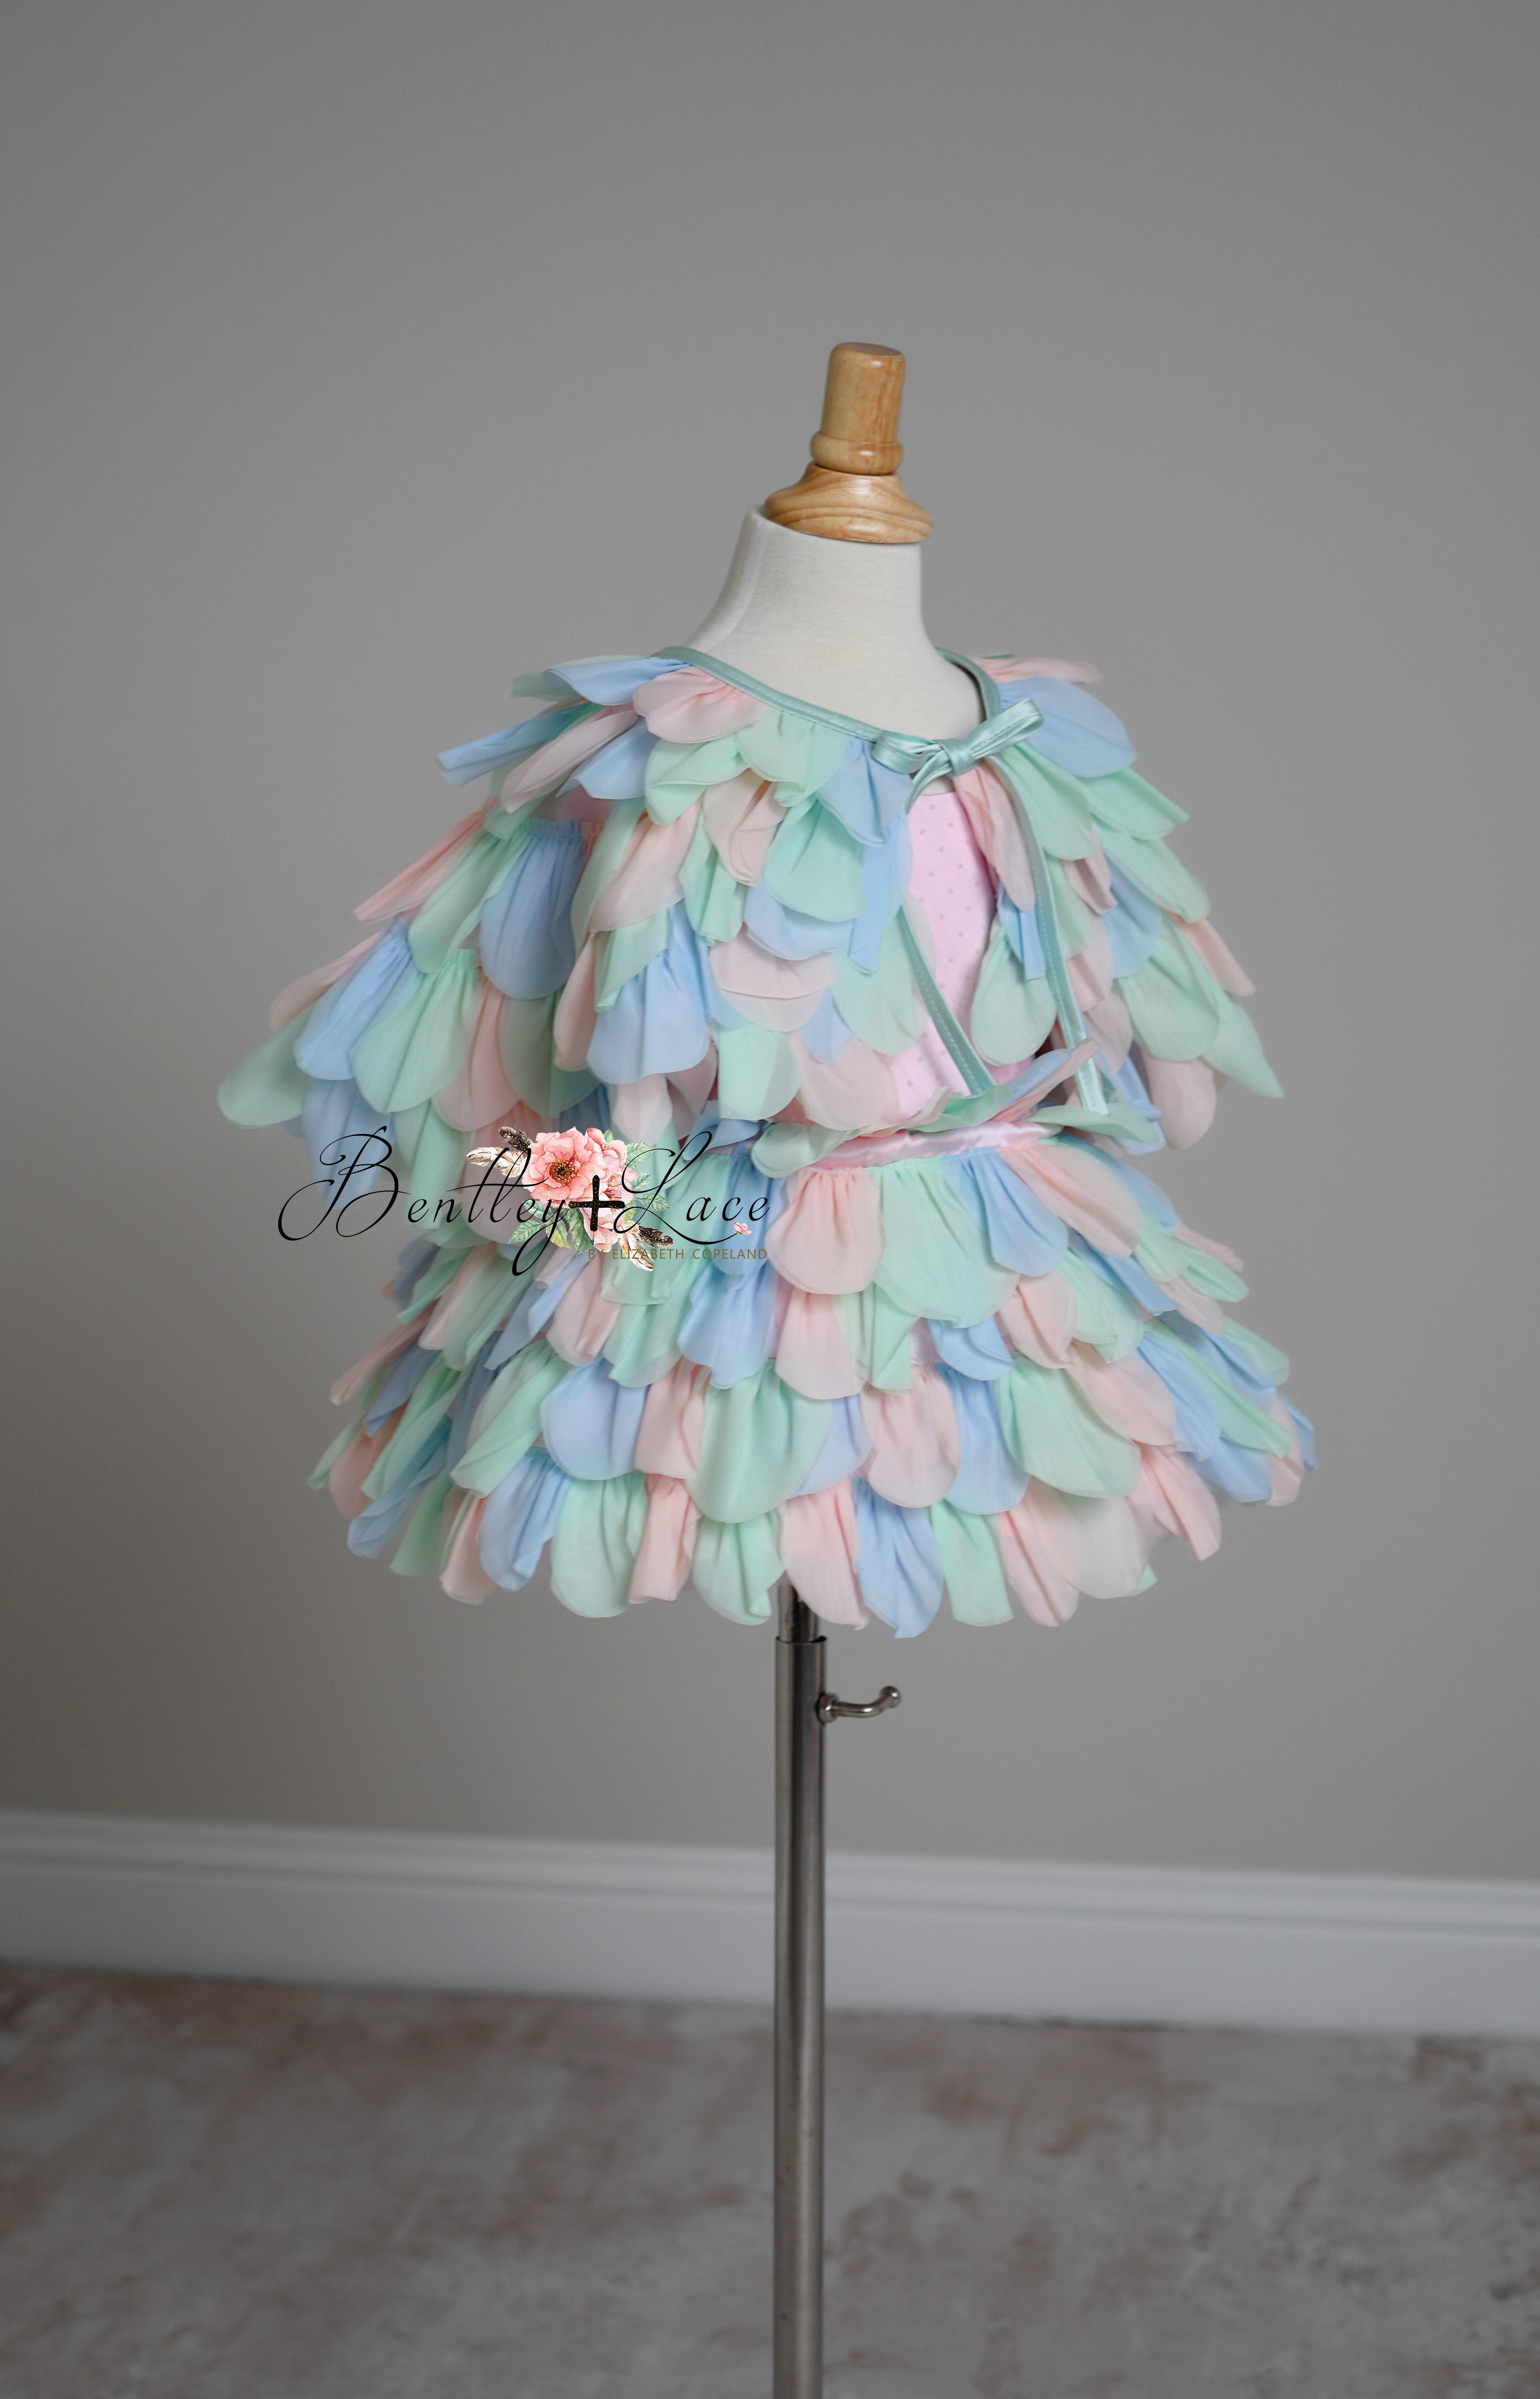 LIMITED EDITION COUTURE GOWN "PETAL WHISPERS" PASTEL - PETAL LENGTH DRESS + CAPE  Editorial Dress, Couture Gown, Special Occasion Dress